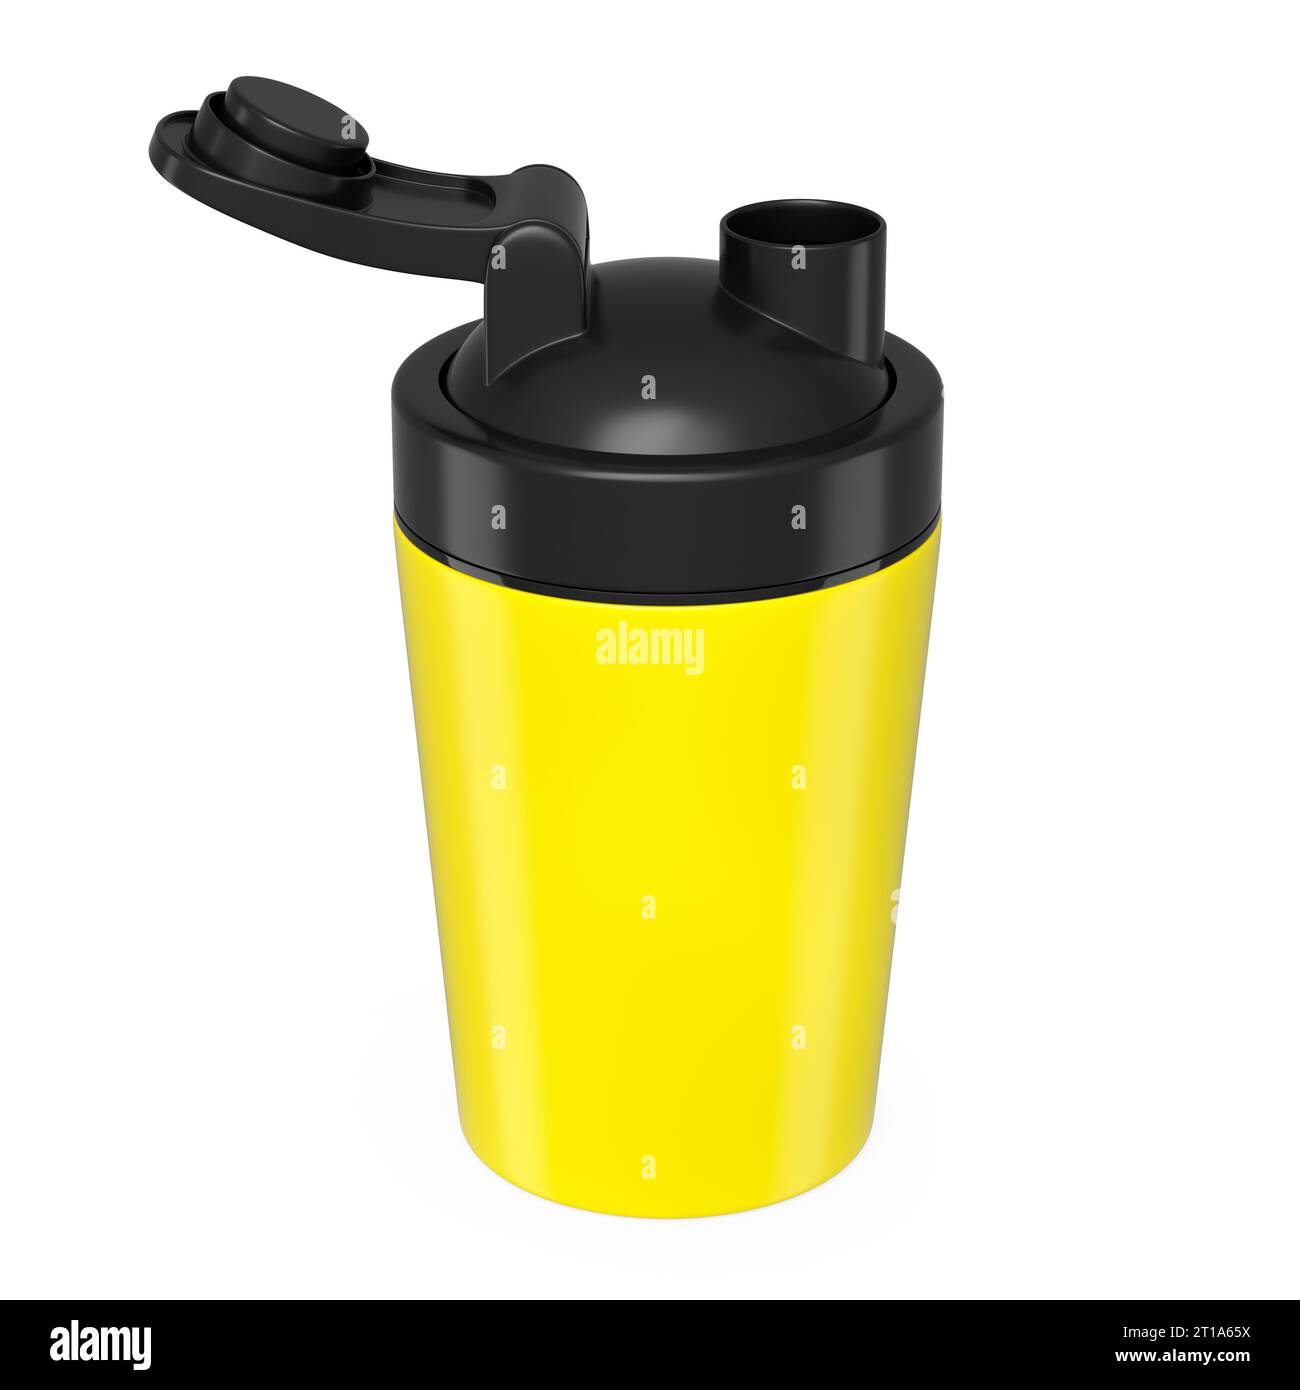 https://c8.alamy.com/comp/2T1A65X/yellow-plastic-sport-shaker-for-protein-drink-isolated-on-white-background-3d-render-of-sport-food-cocktail-container-2T1A65X.jpg